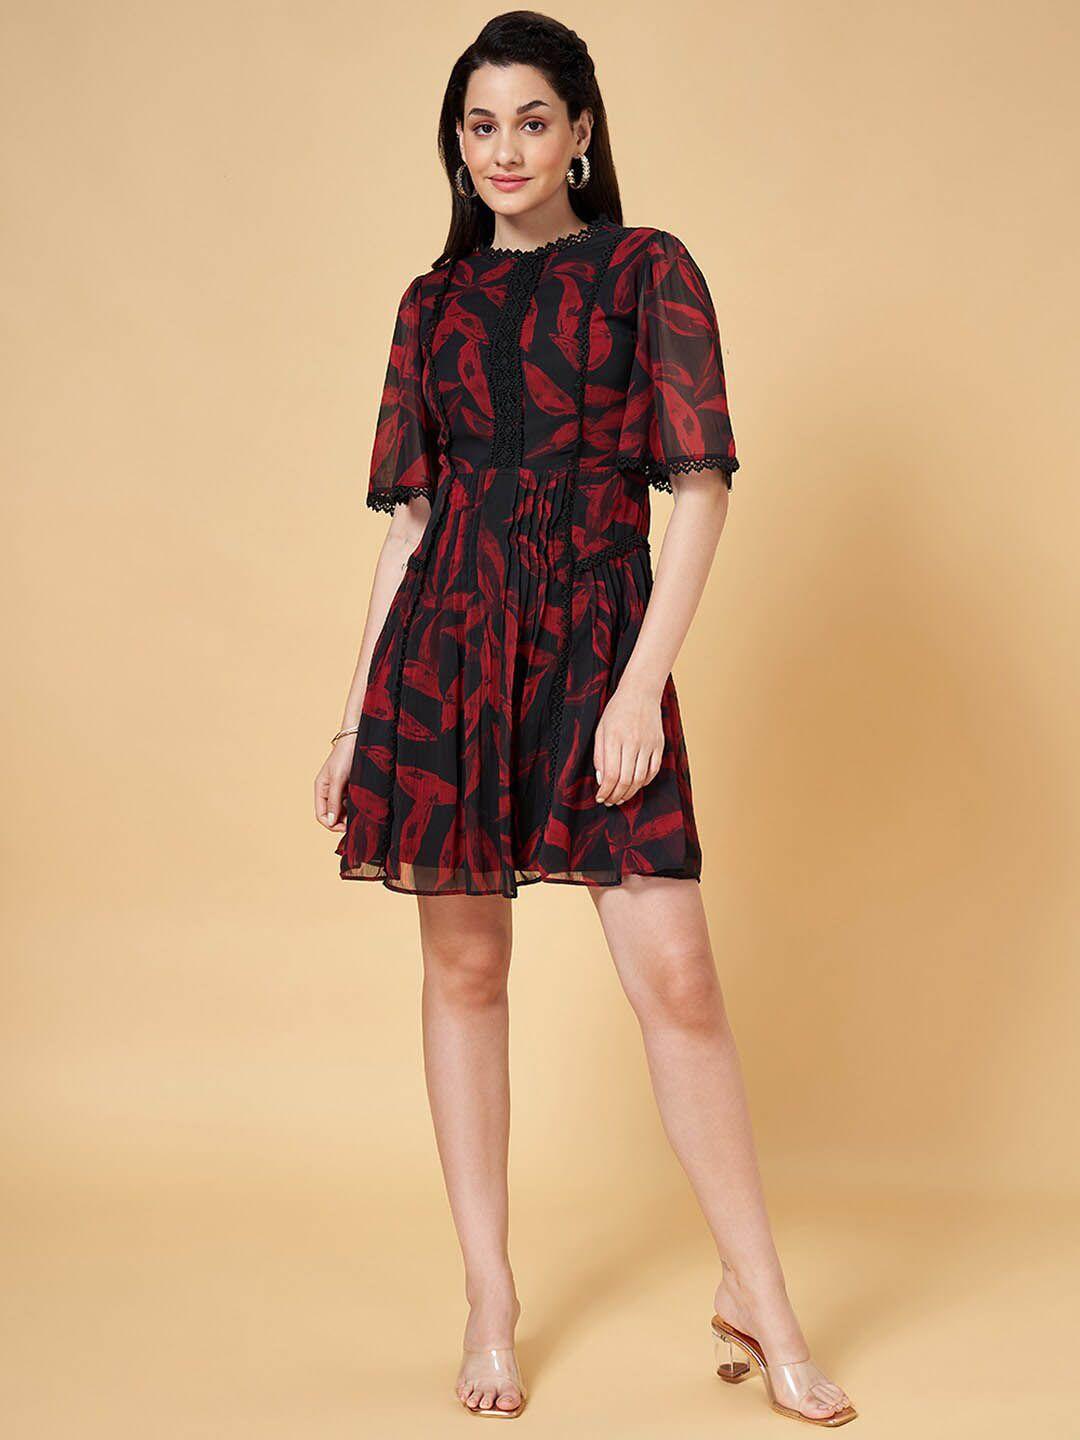 honey-by-pantaloons-floral-printed-round-flared-sleeve-lace-inserts-fit-&-flare-dress